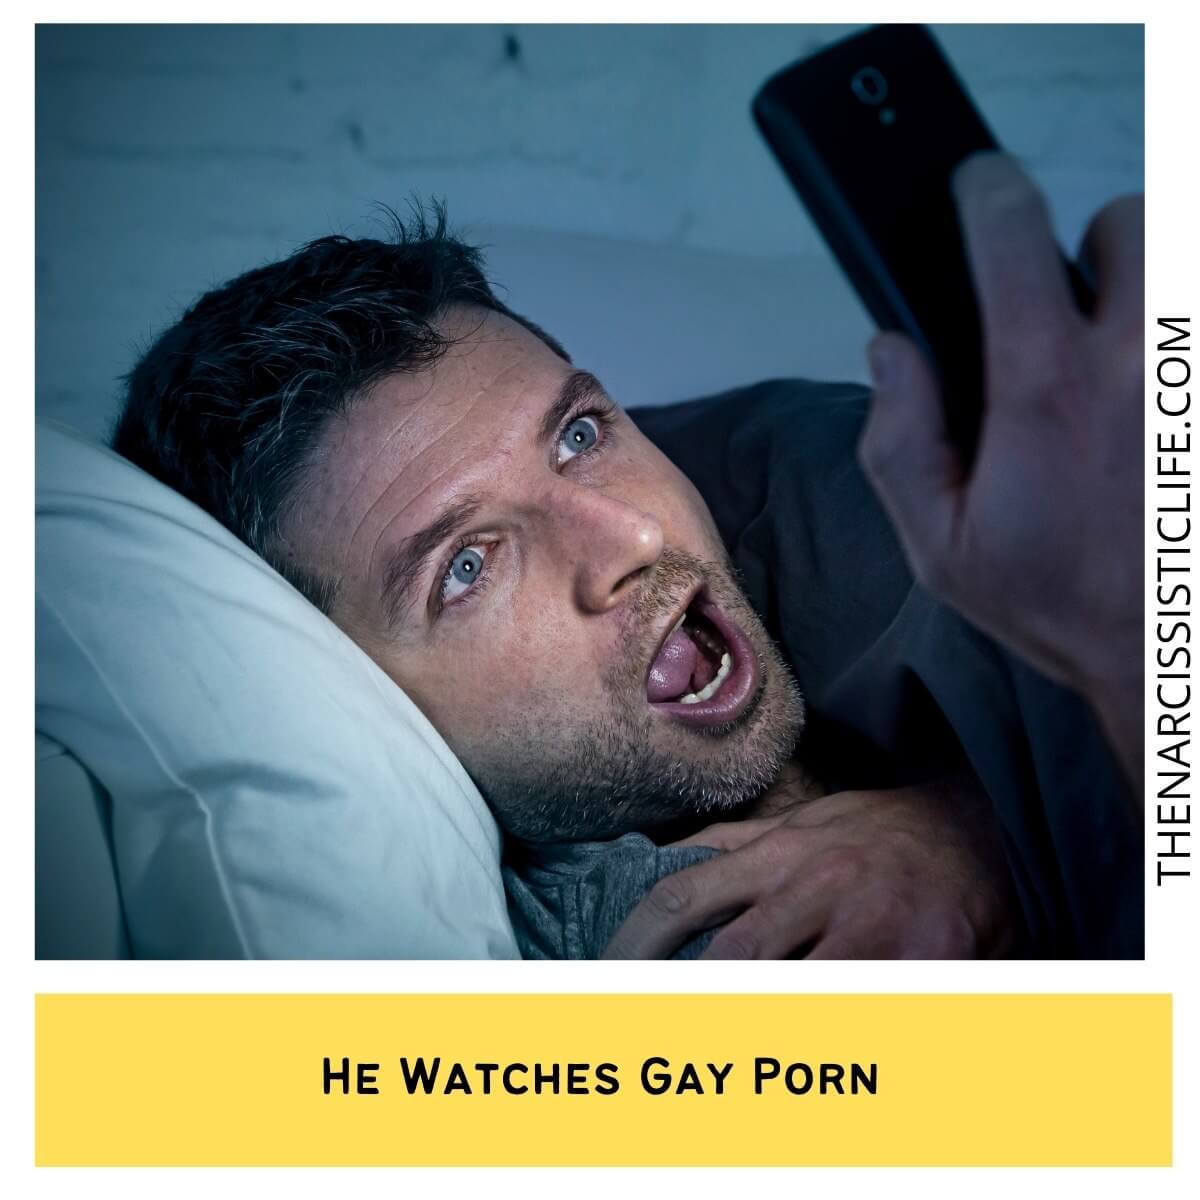 16 Signs A Guy Is Pretending To Be Straight - The Narcissistic Life